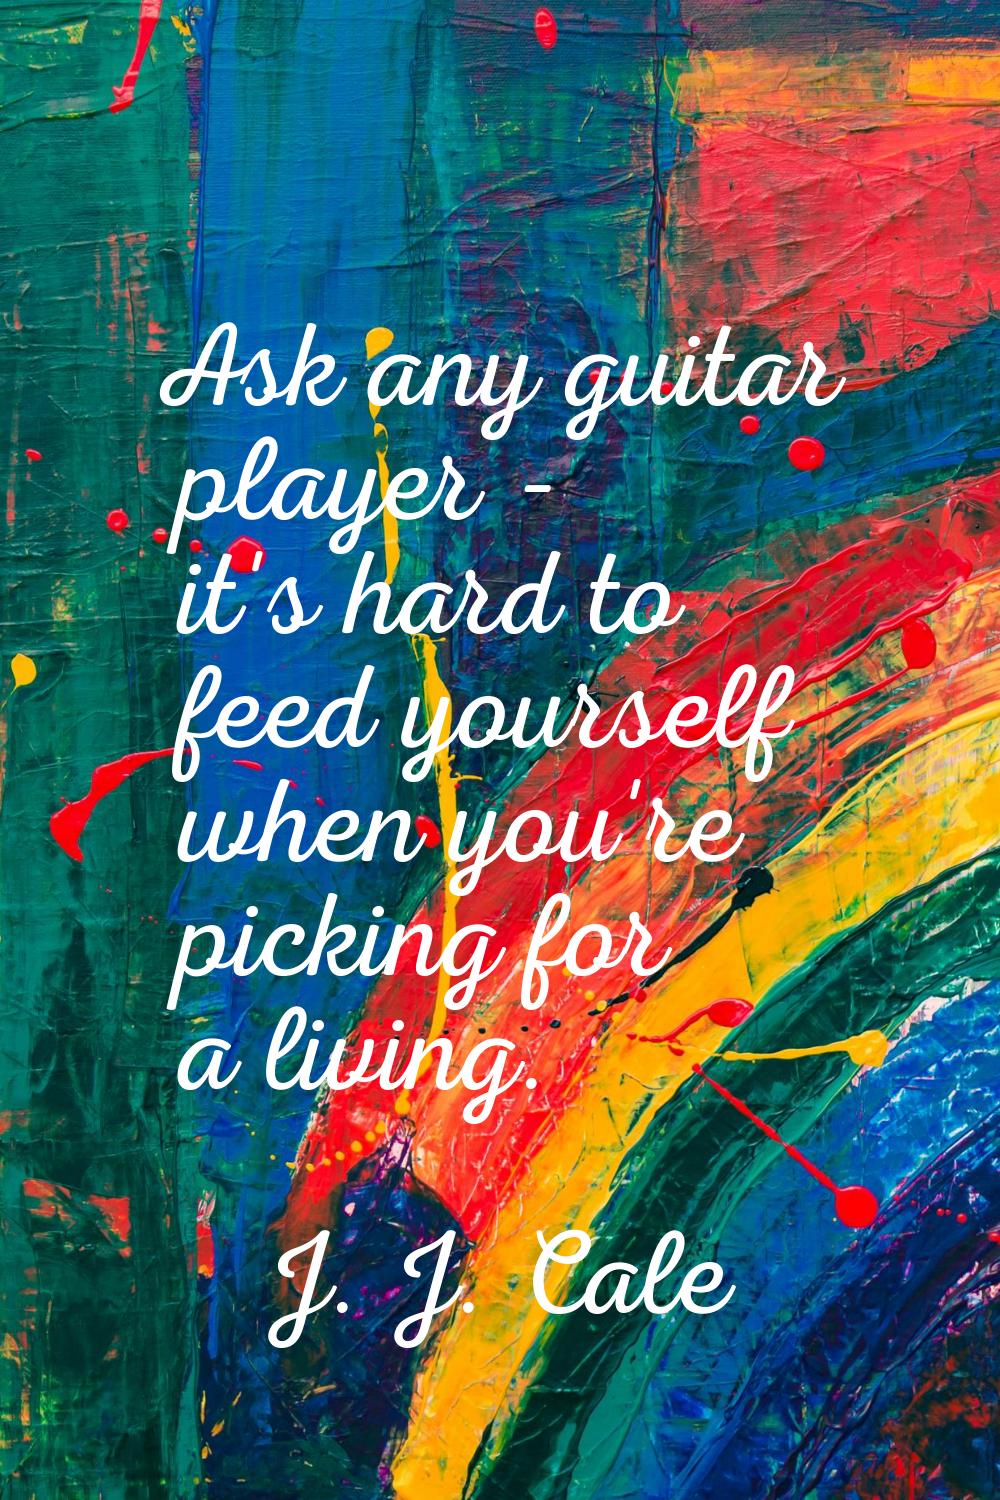 Ask any guitar player - it's hard to feed yourself when you're picking for a living.